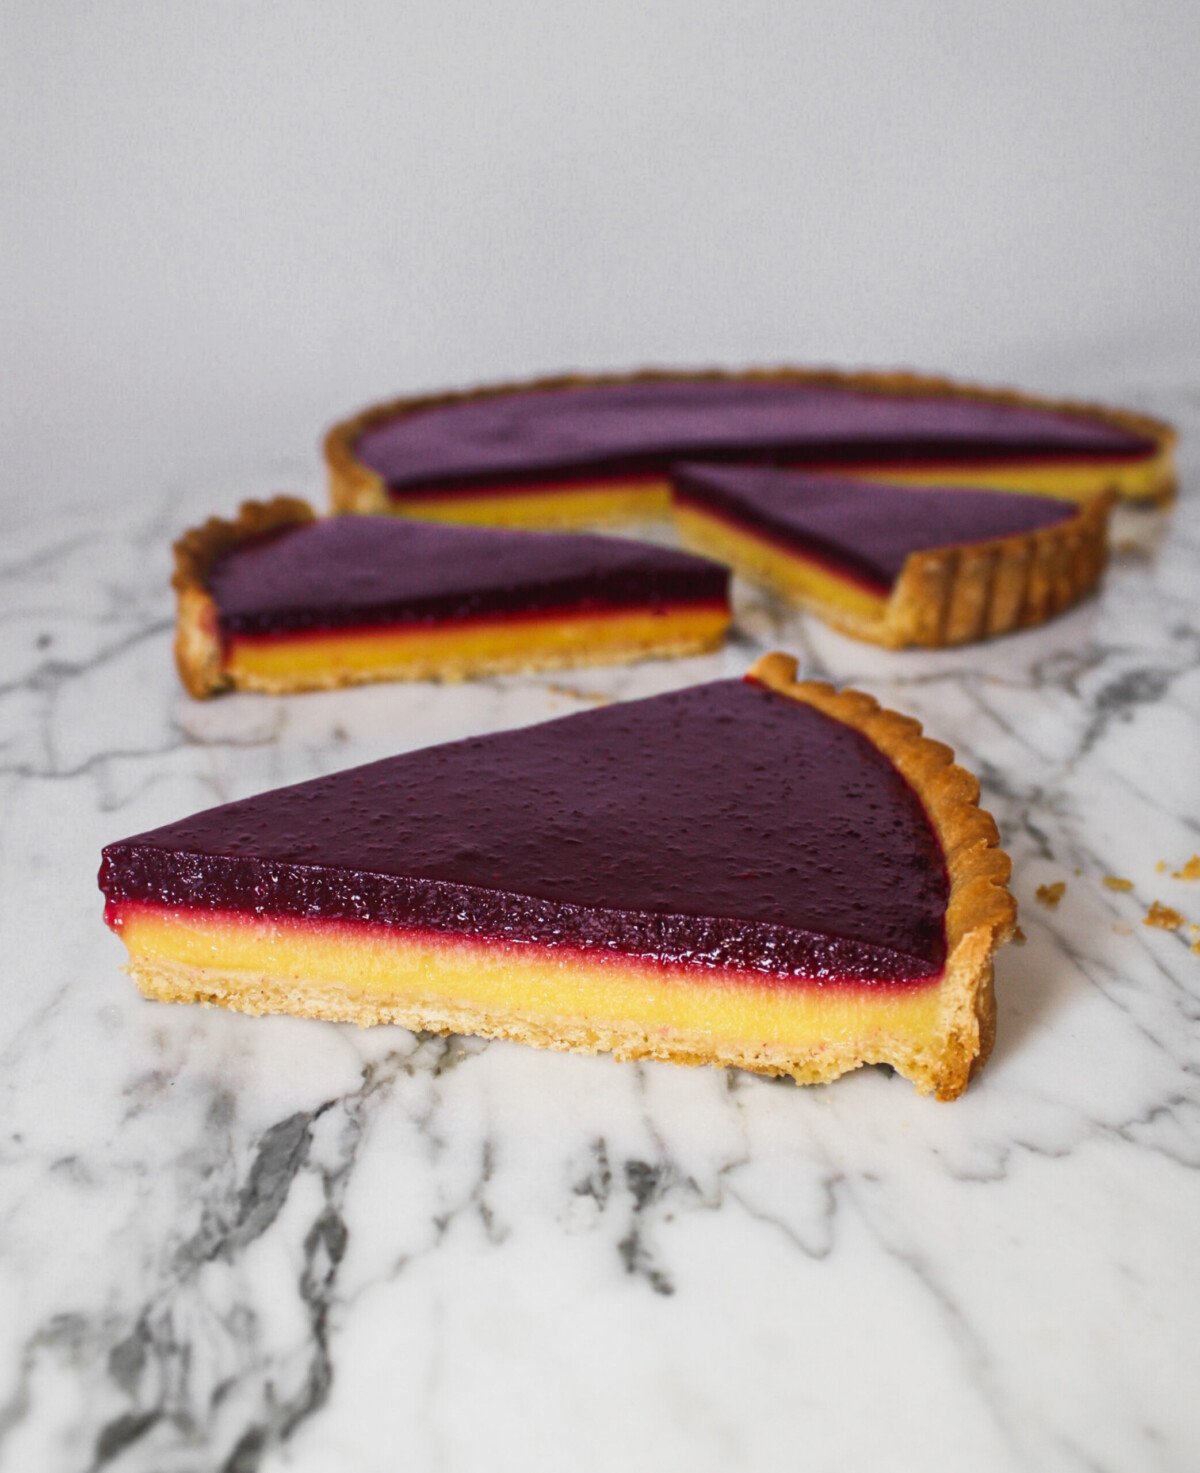 Blueberry lemon tart with yellow and purple layers, set on a gray plate on top of a marble surface.